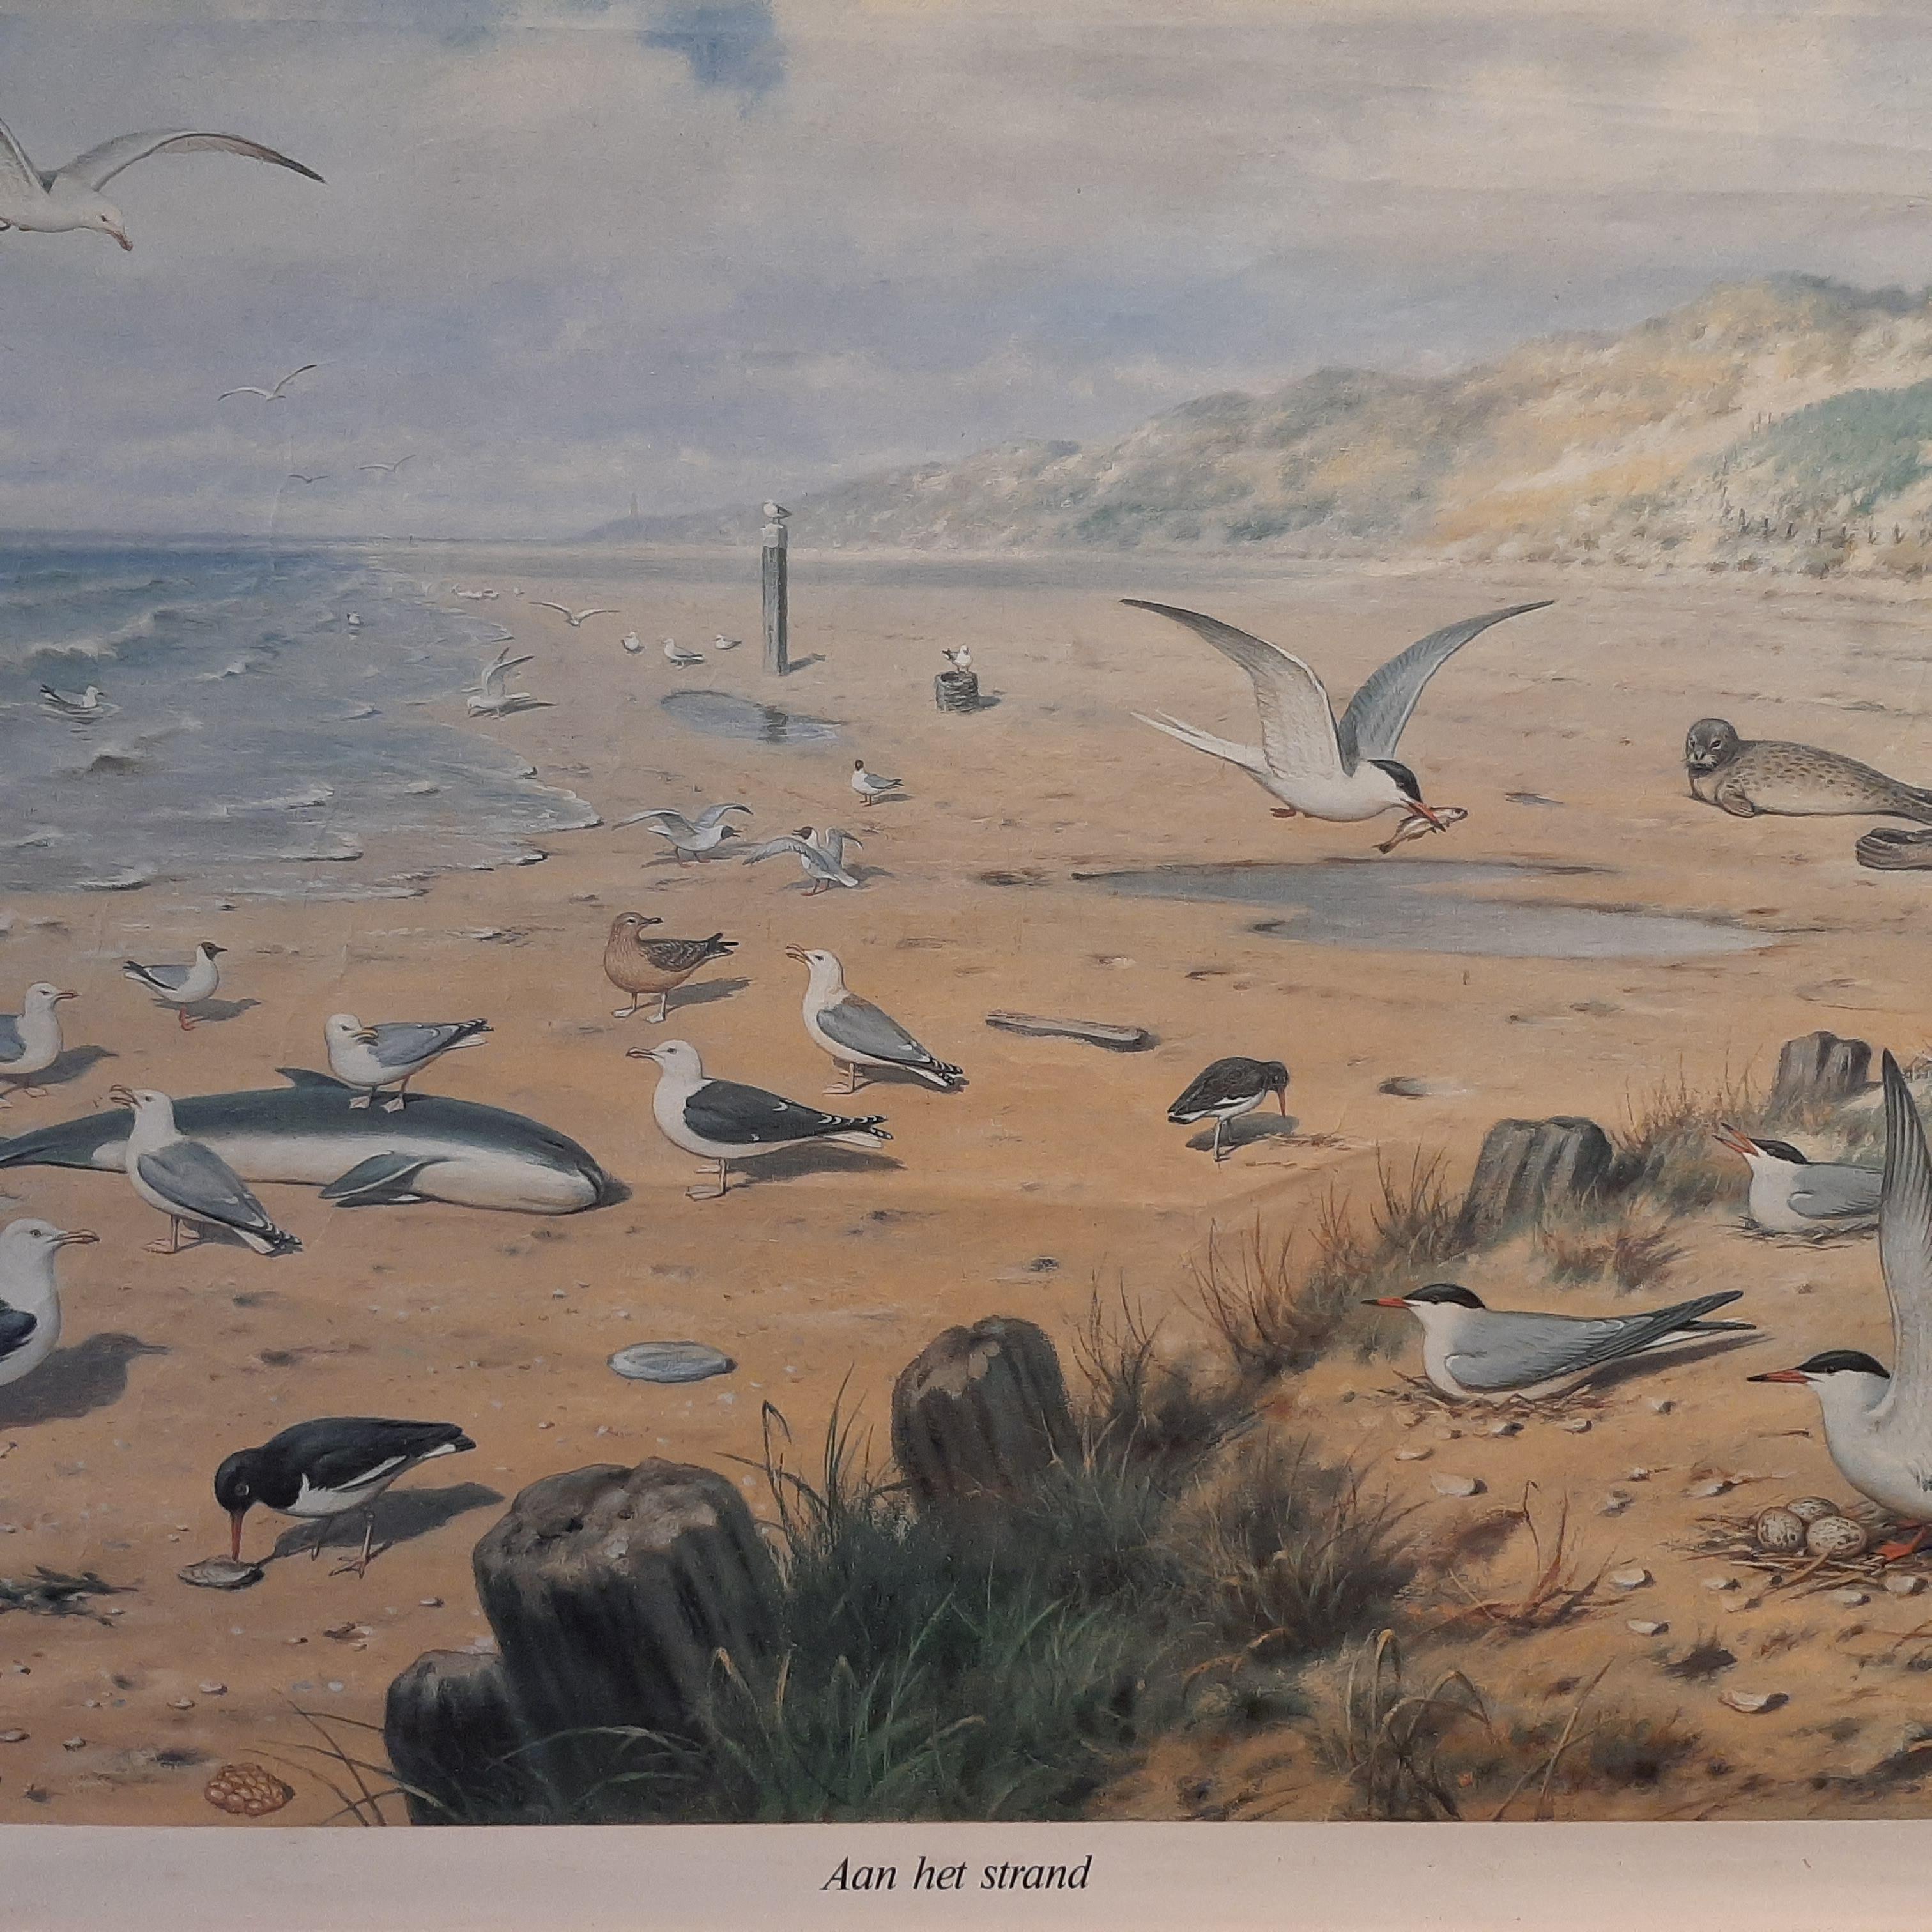 Vintage wall chart titled 'Aan het Strand'. This wall chart shows a beach scene with many birds and other animals. Published, circa 1980.